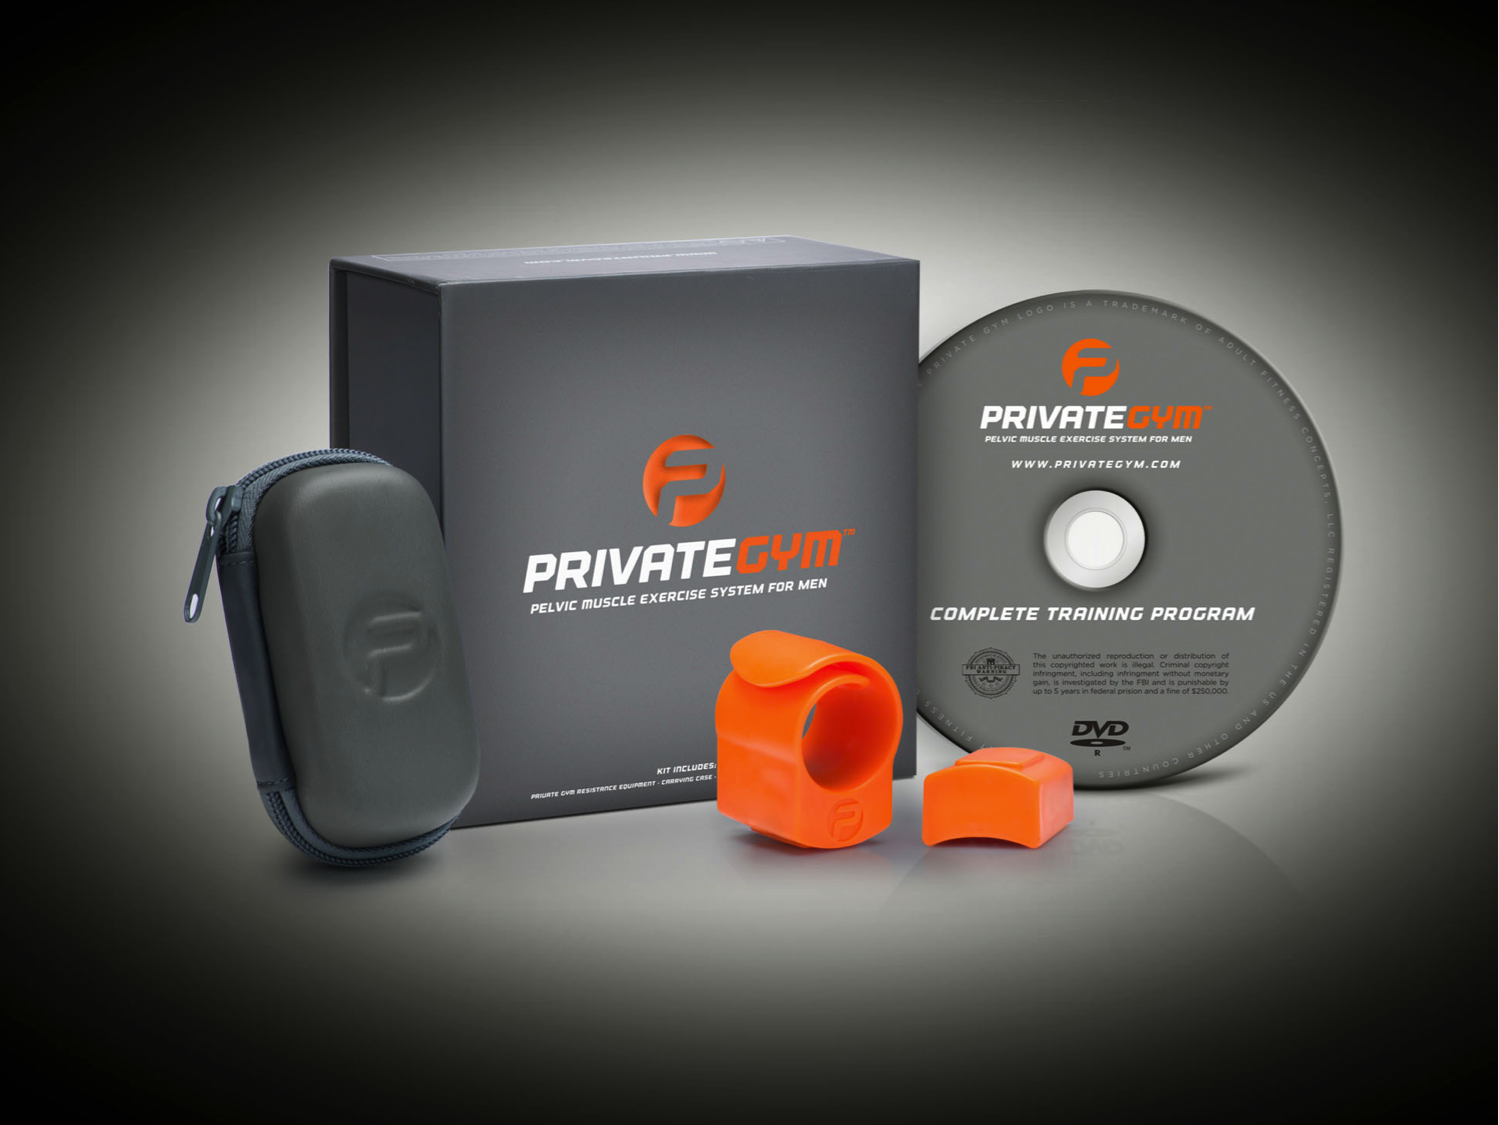 Private Gym product review by Dan Powers of Beyond the Bedroom